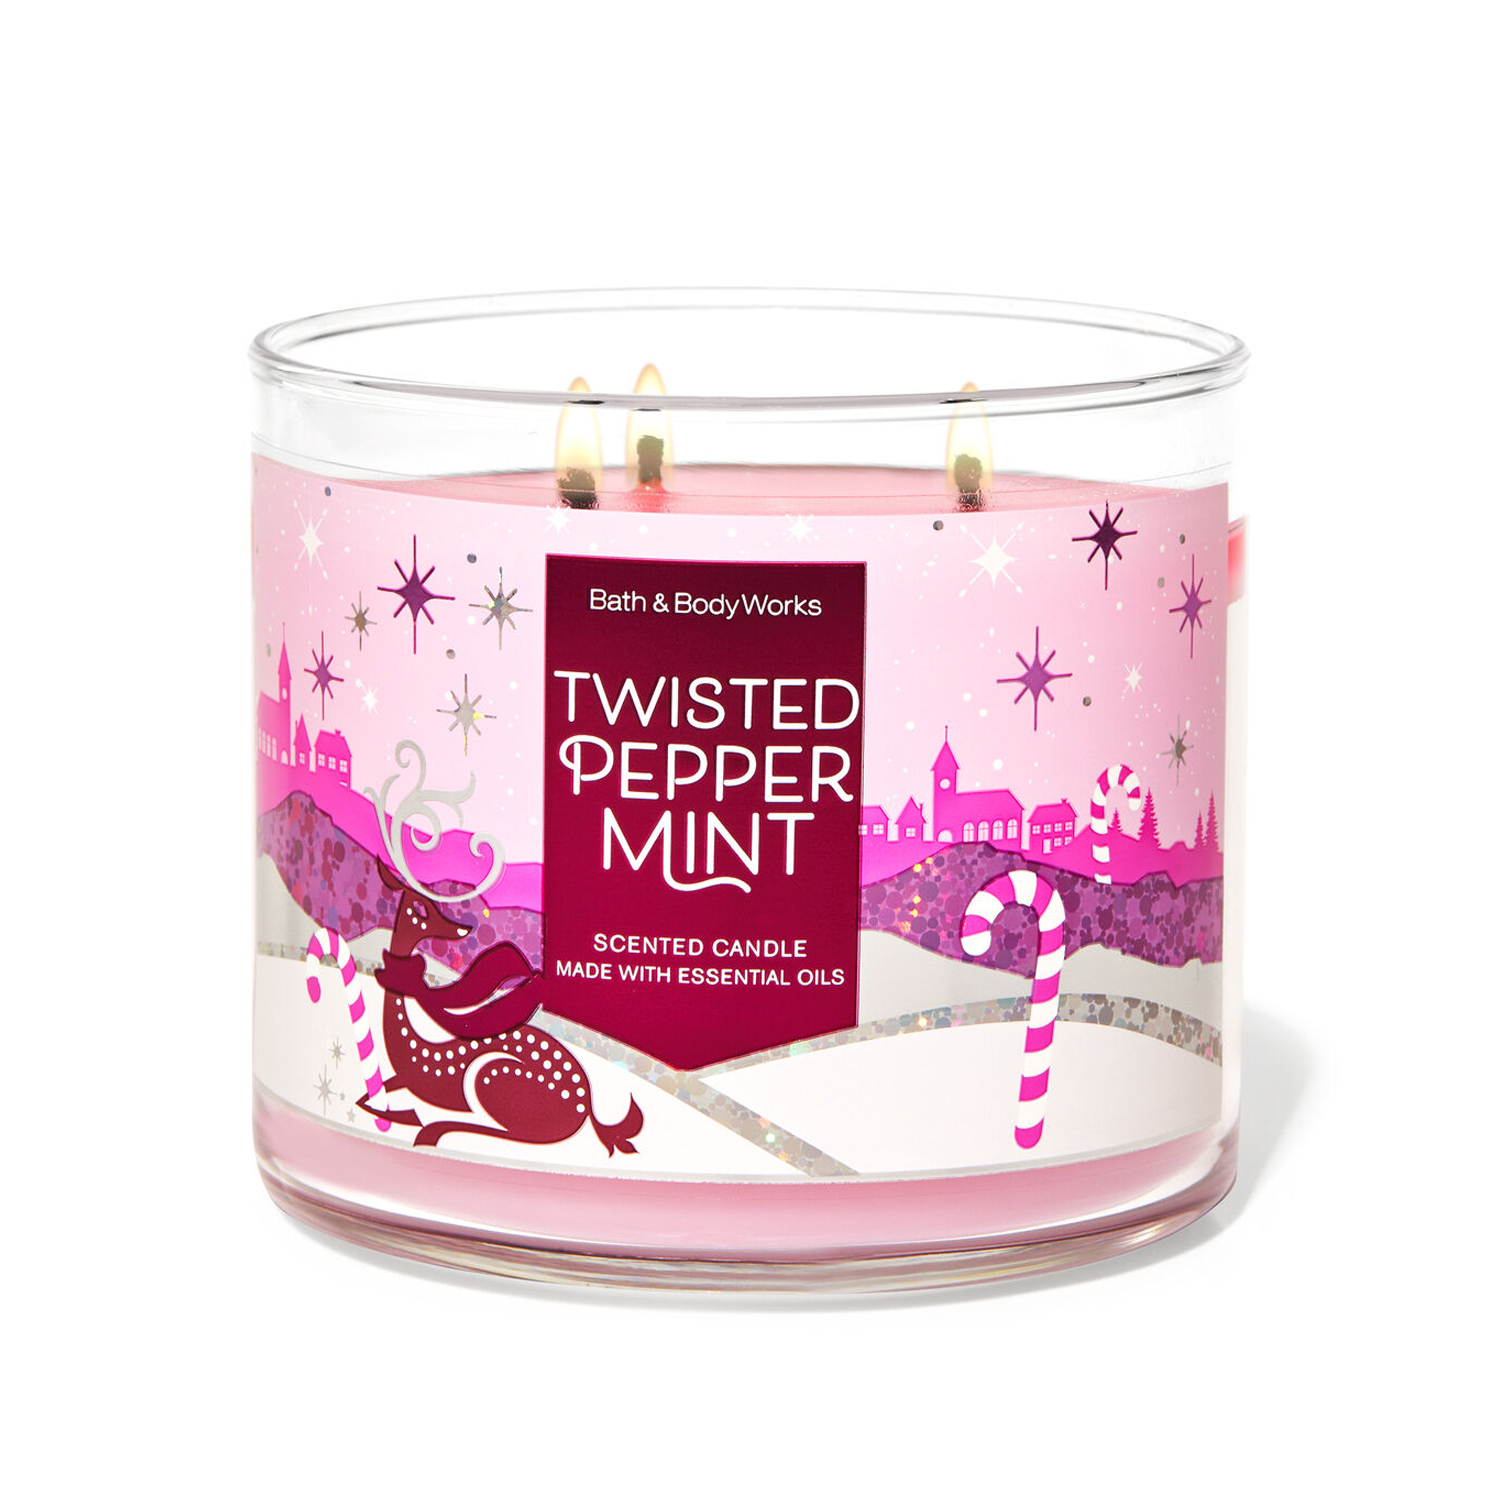 BATH & BODY WORKS TWISTED PEPPERMINT SCENTED CANDLE 3 WICK 14.5 OZ LARGE PINK 